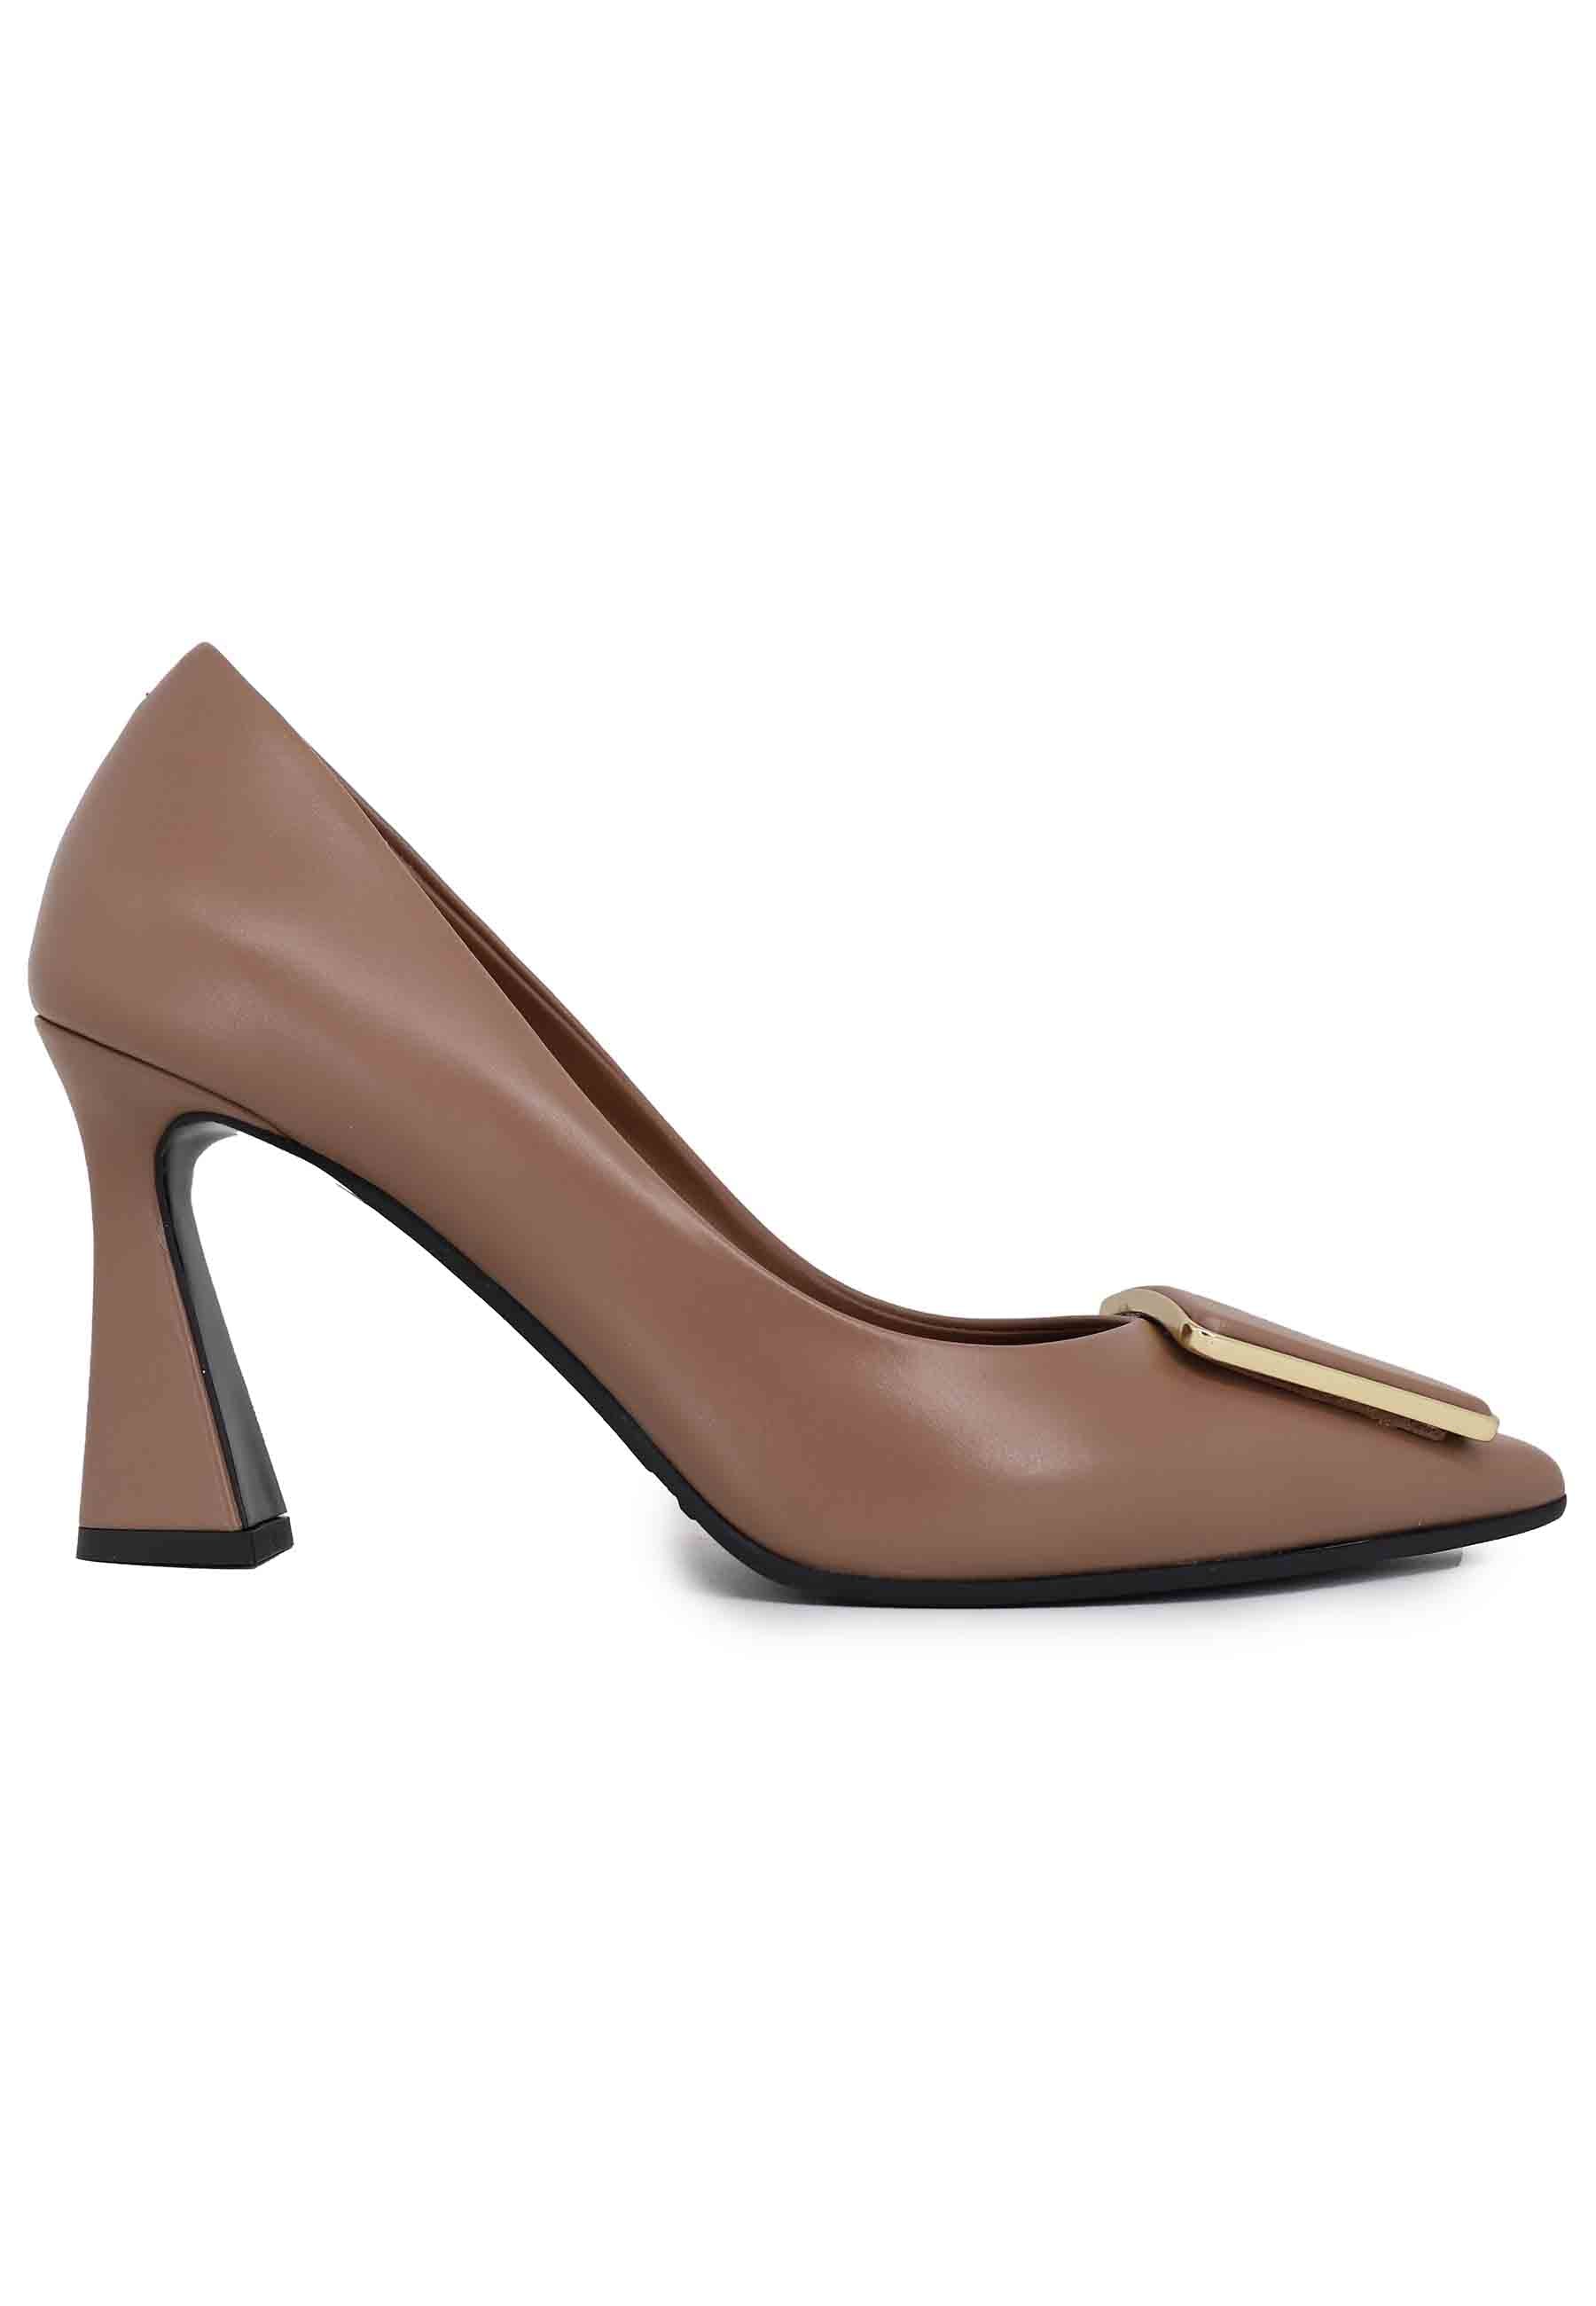 Women's pumps in natural tan leather with high heel and buckle